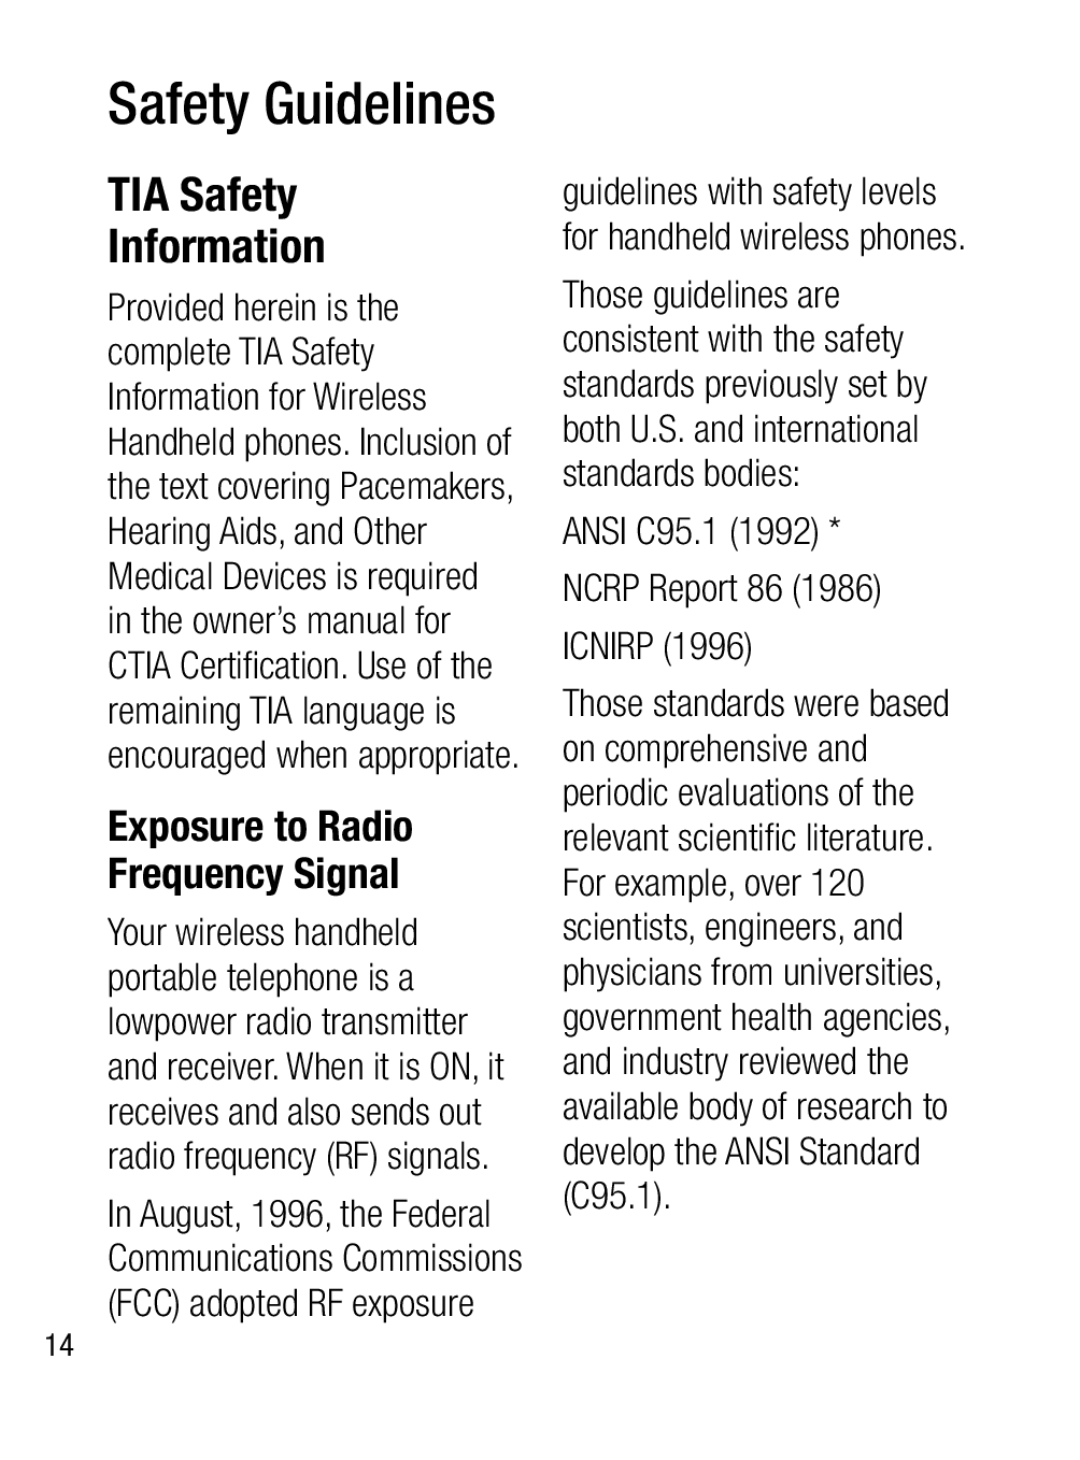 LG Electronics A133CH manual Safety Guidelines, TIA Safety Information, Exposure to Radio Frequency Signal 